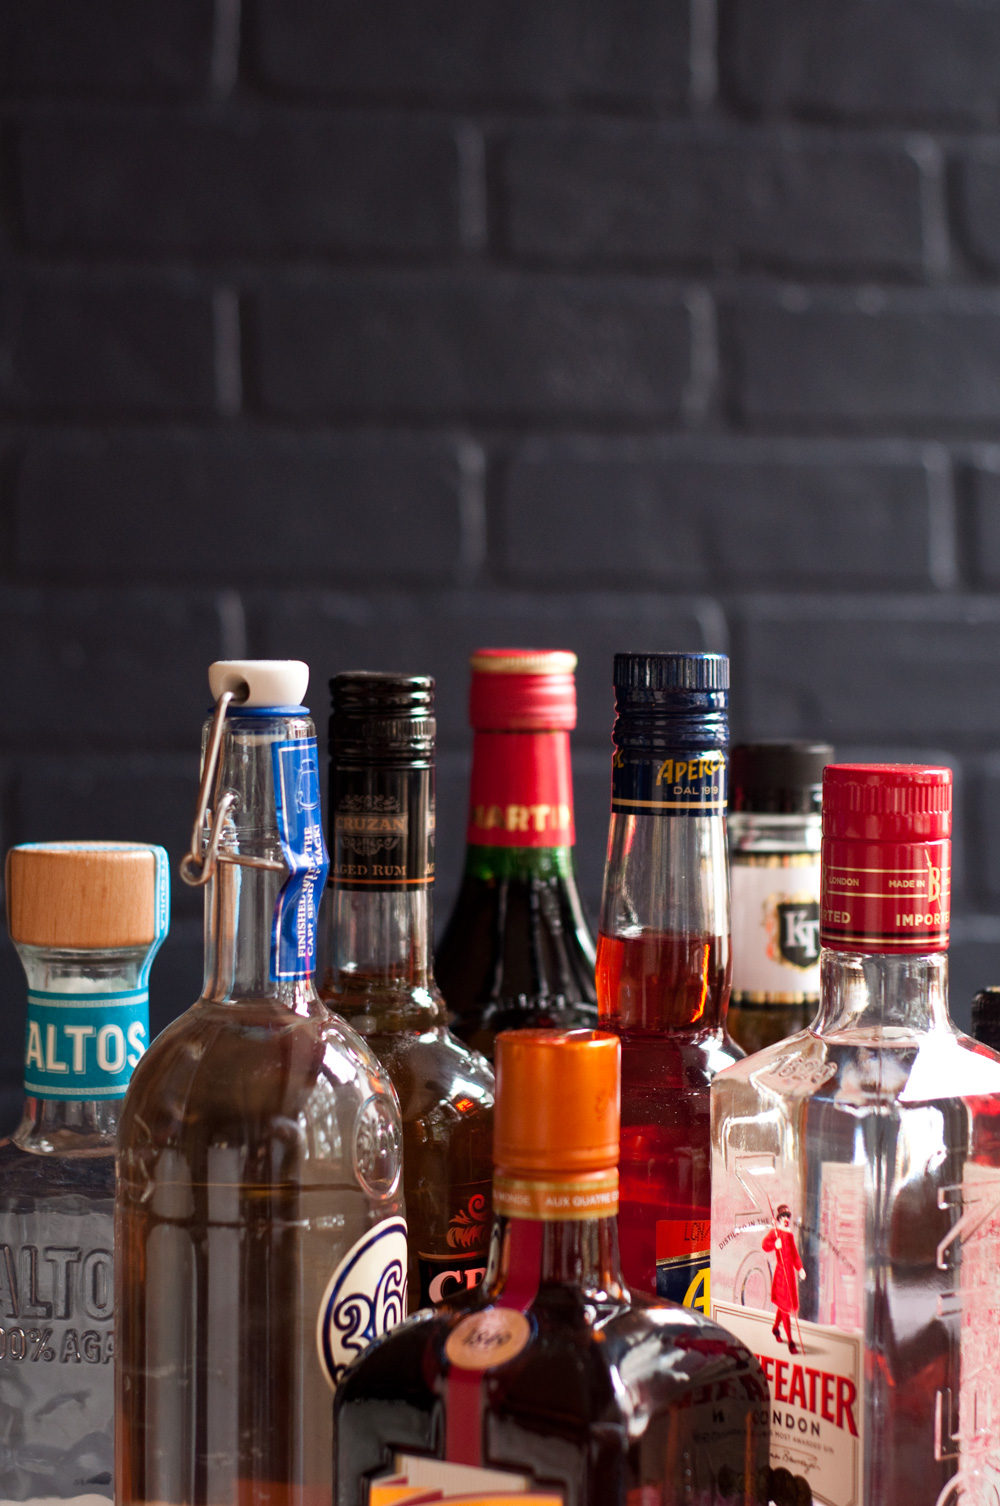 Essential Liquors and Mixers to Stock in Your Home Bar